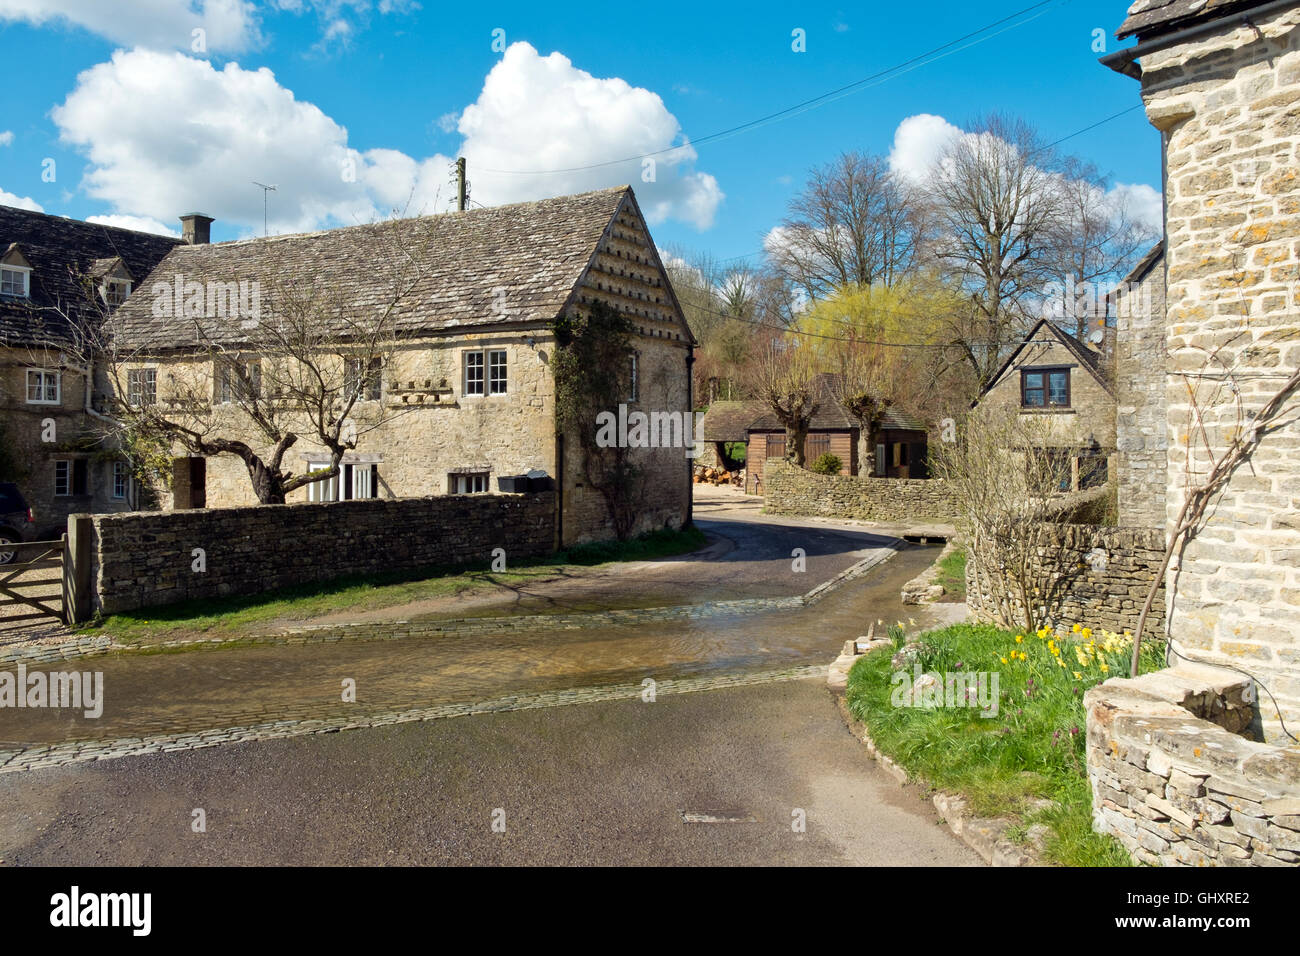 Picturesque Cotswold cottages cluster around the Dunt Stream ford in spring sunshine, Duntisbourne Leer, Cotswolds, Gloucestershire, UK Stock Photo